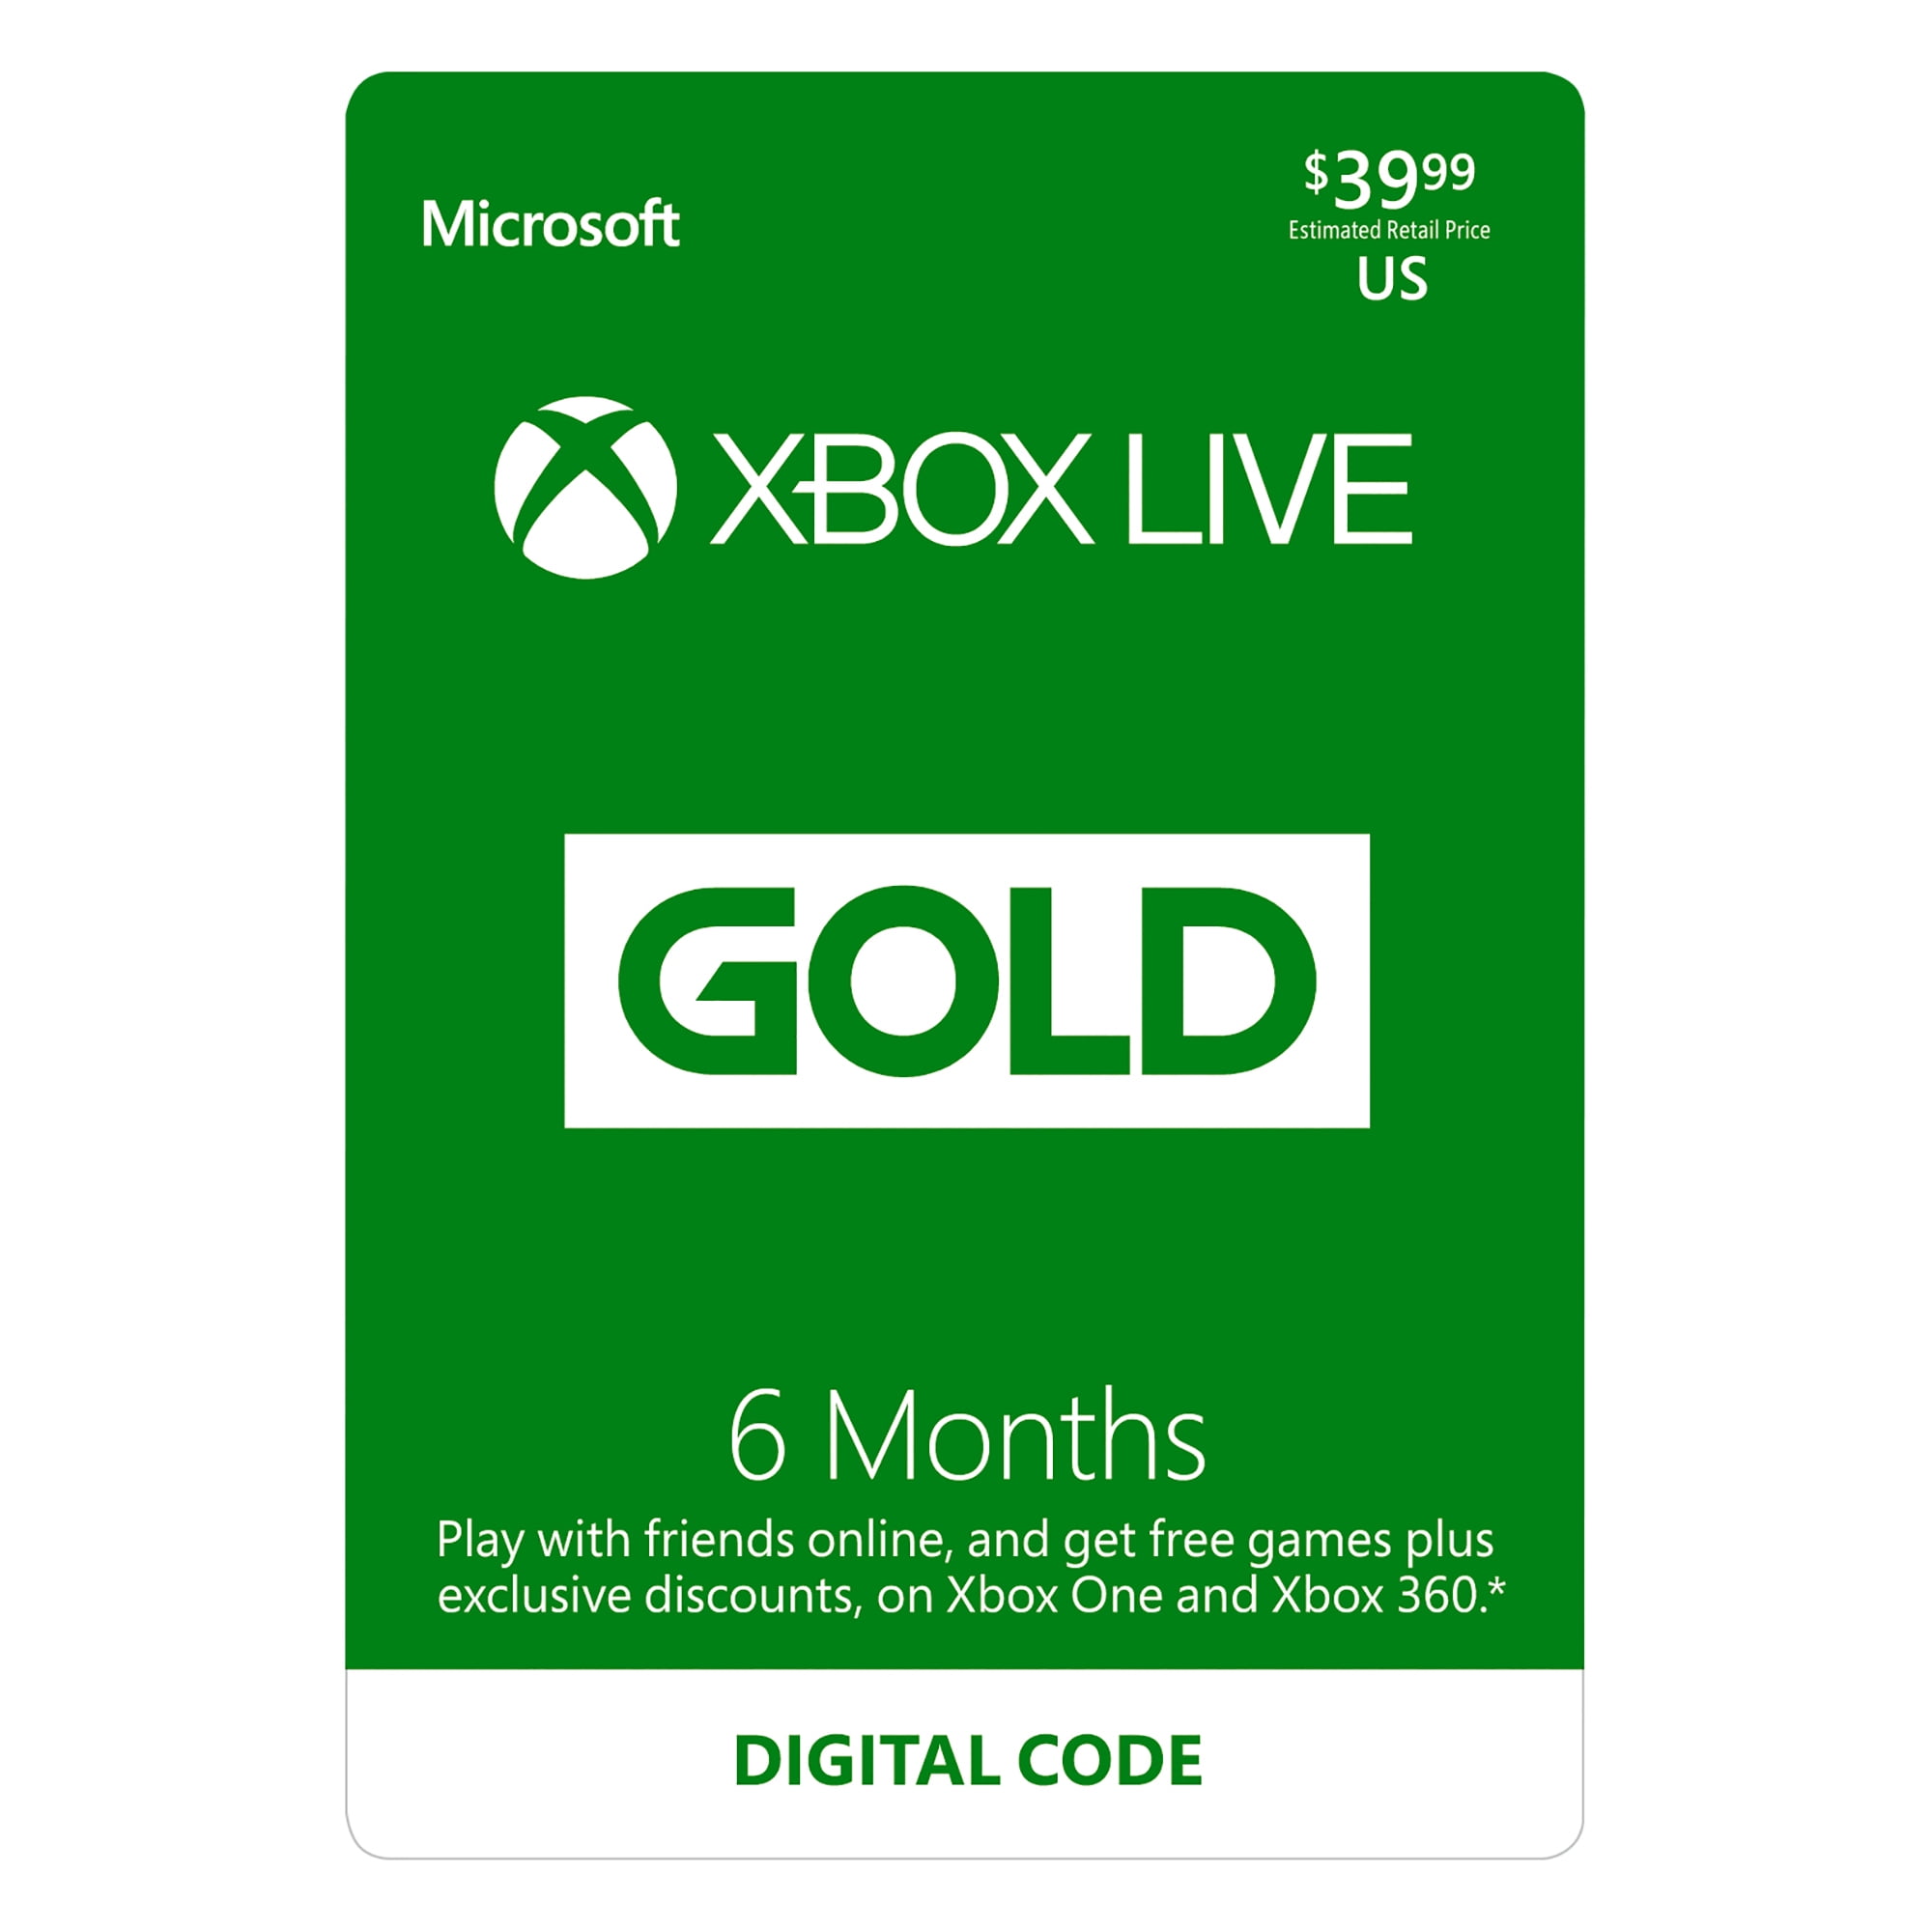 Xbox Game Pass Ultimate 3 Month Sub Card, Interactive Communication  International Inc, Xbox One, (Game Pass + Live Gold)